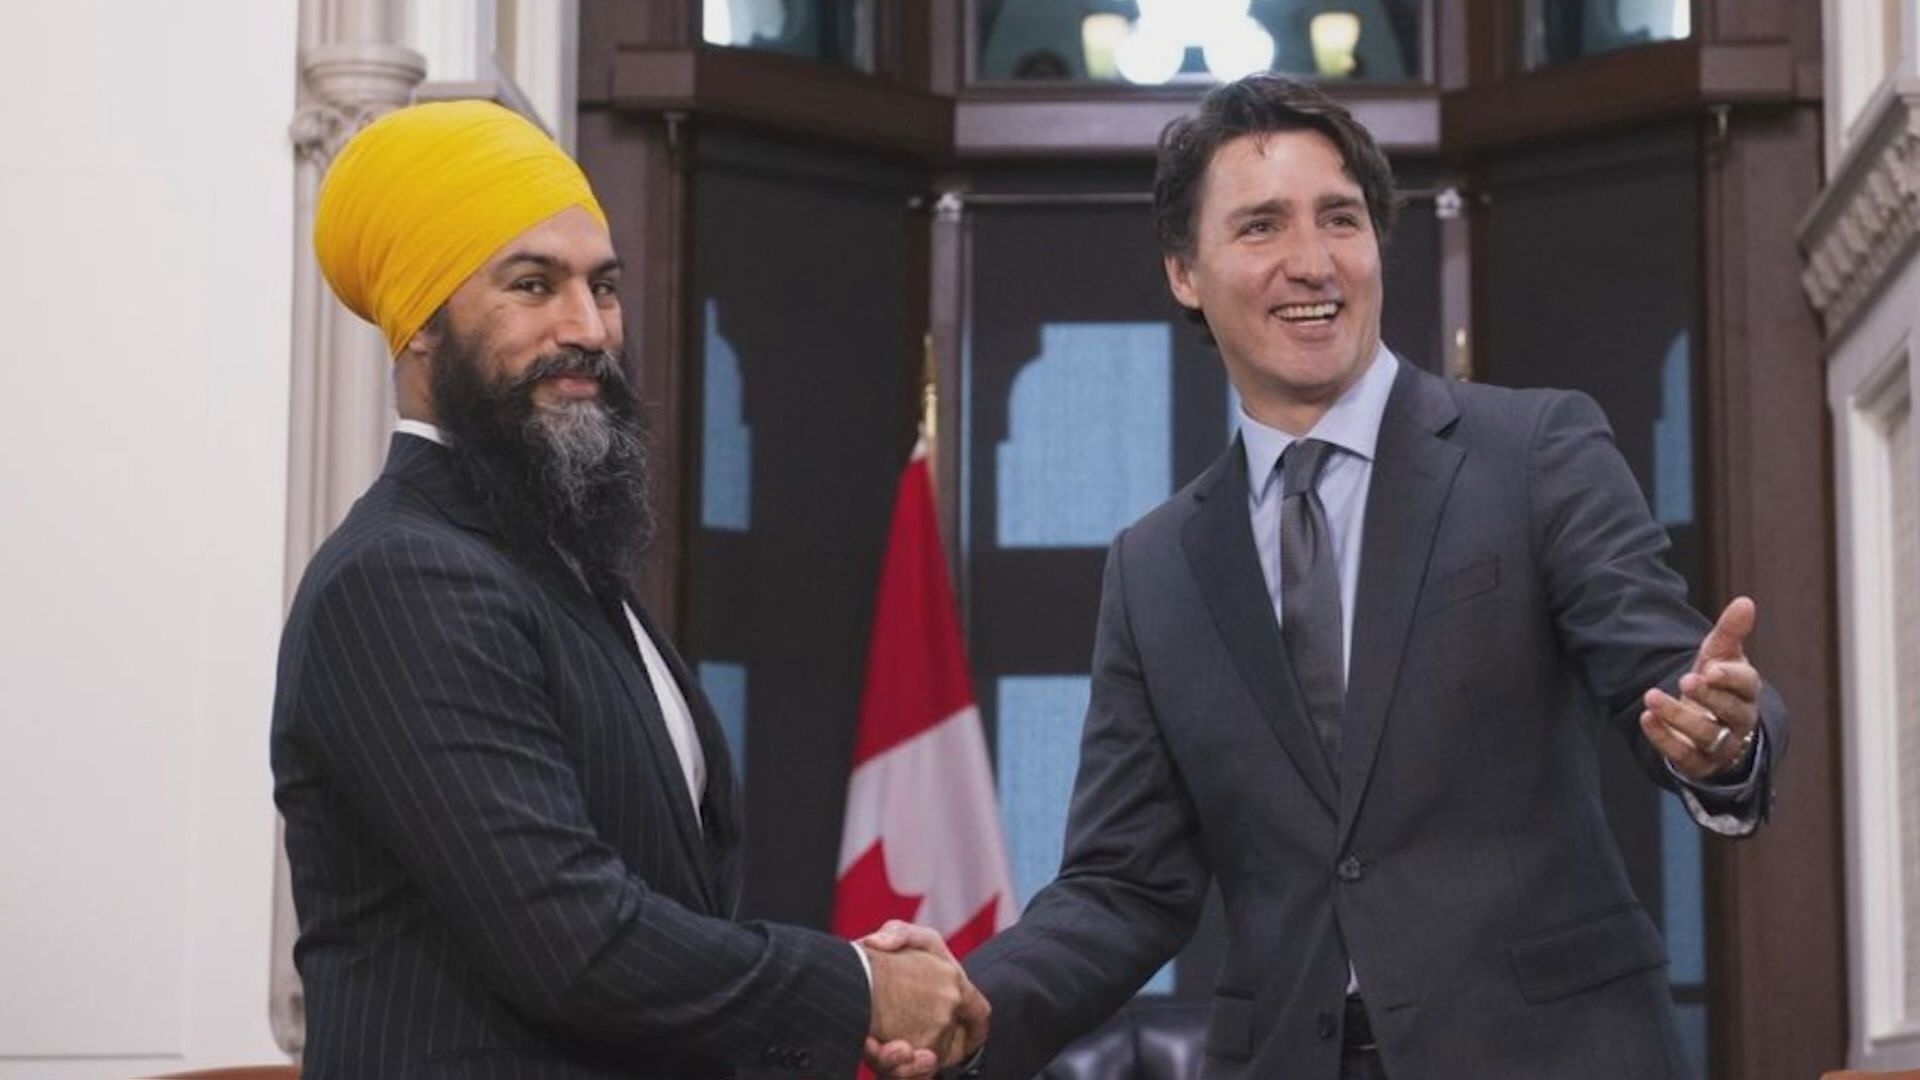 The issue that could ultimately topple the Trudeau government